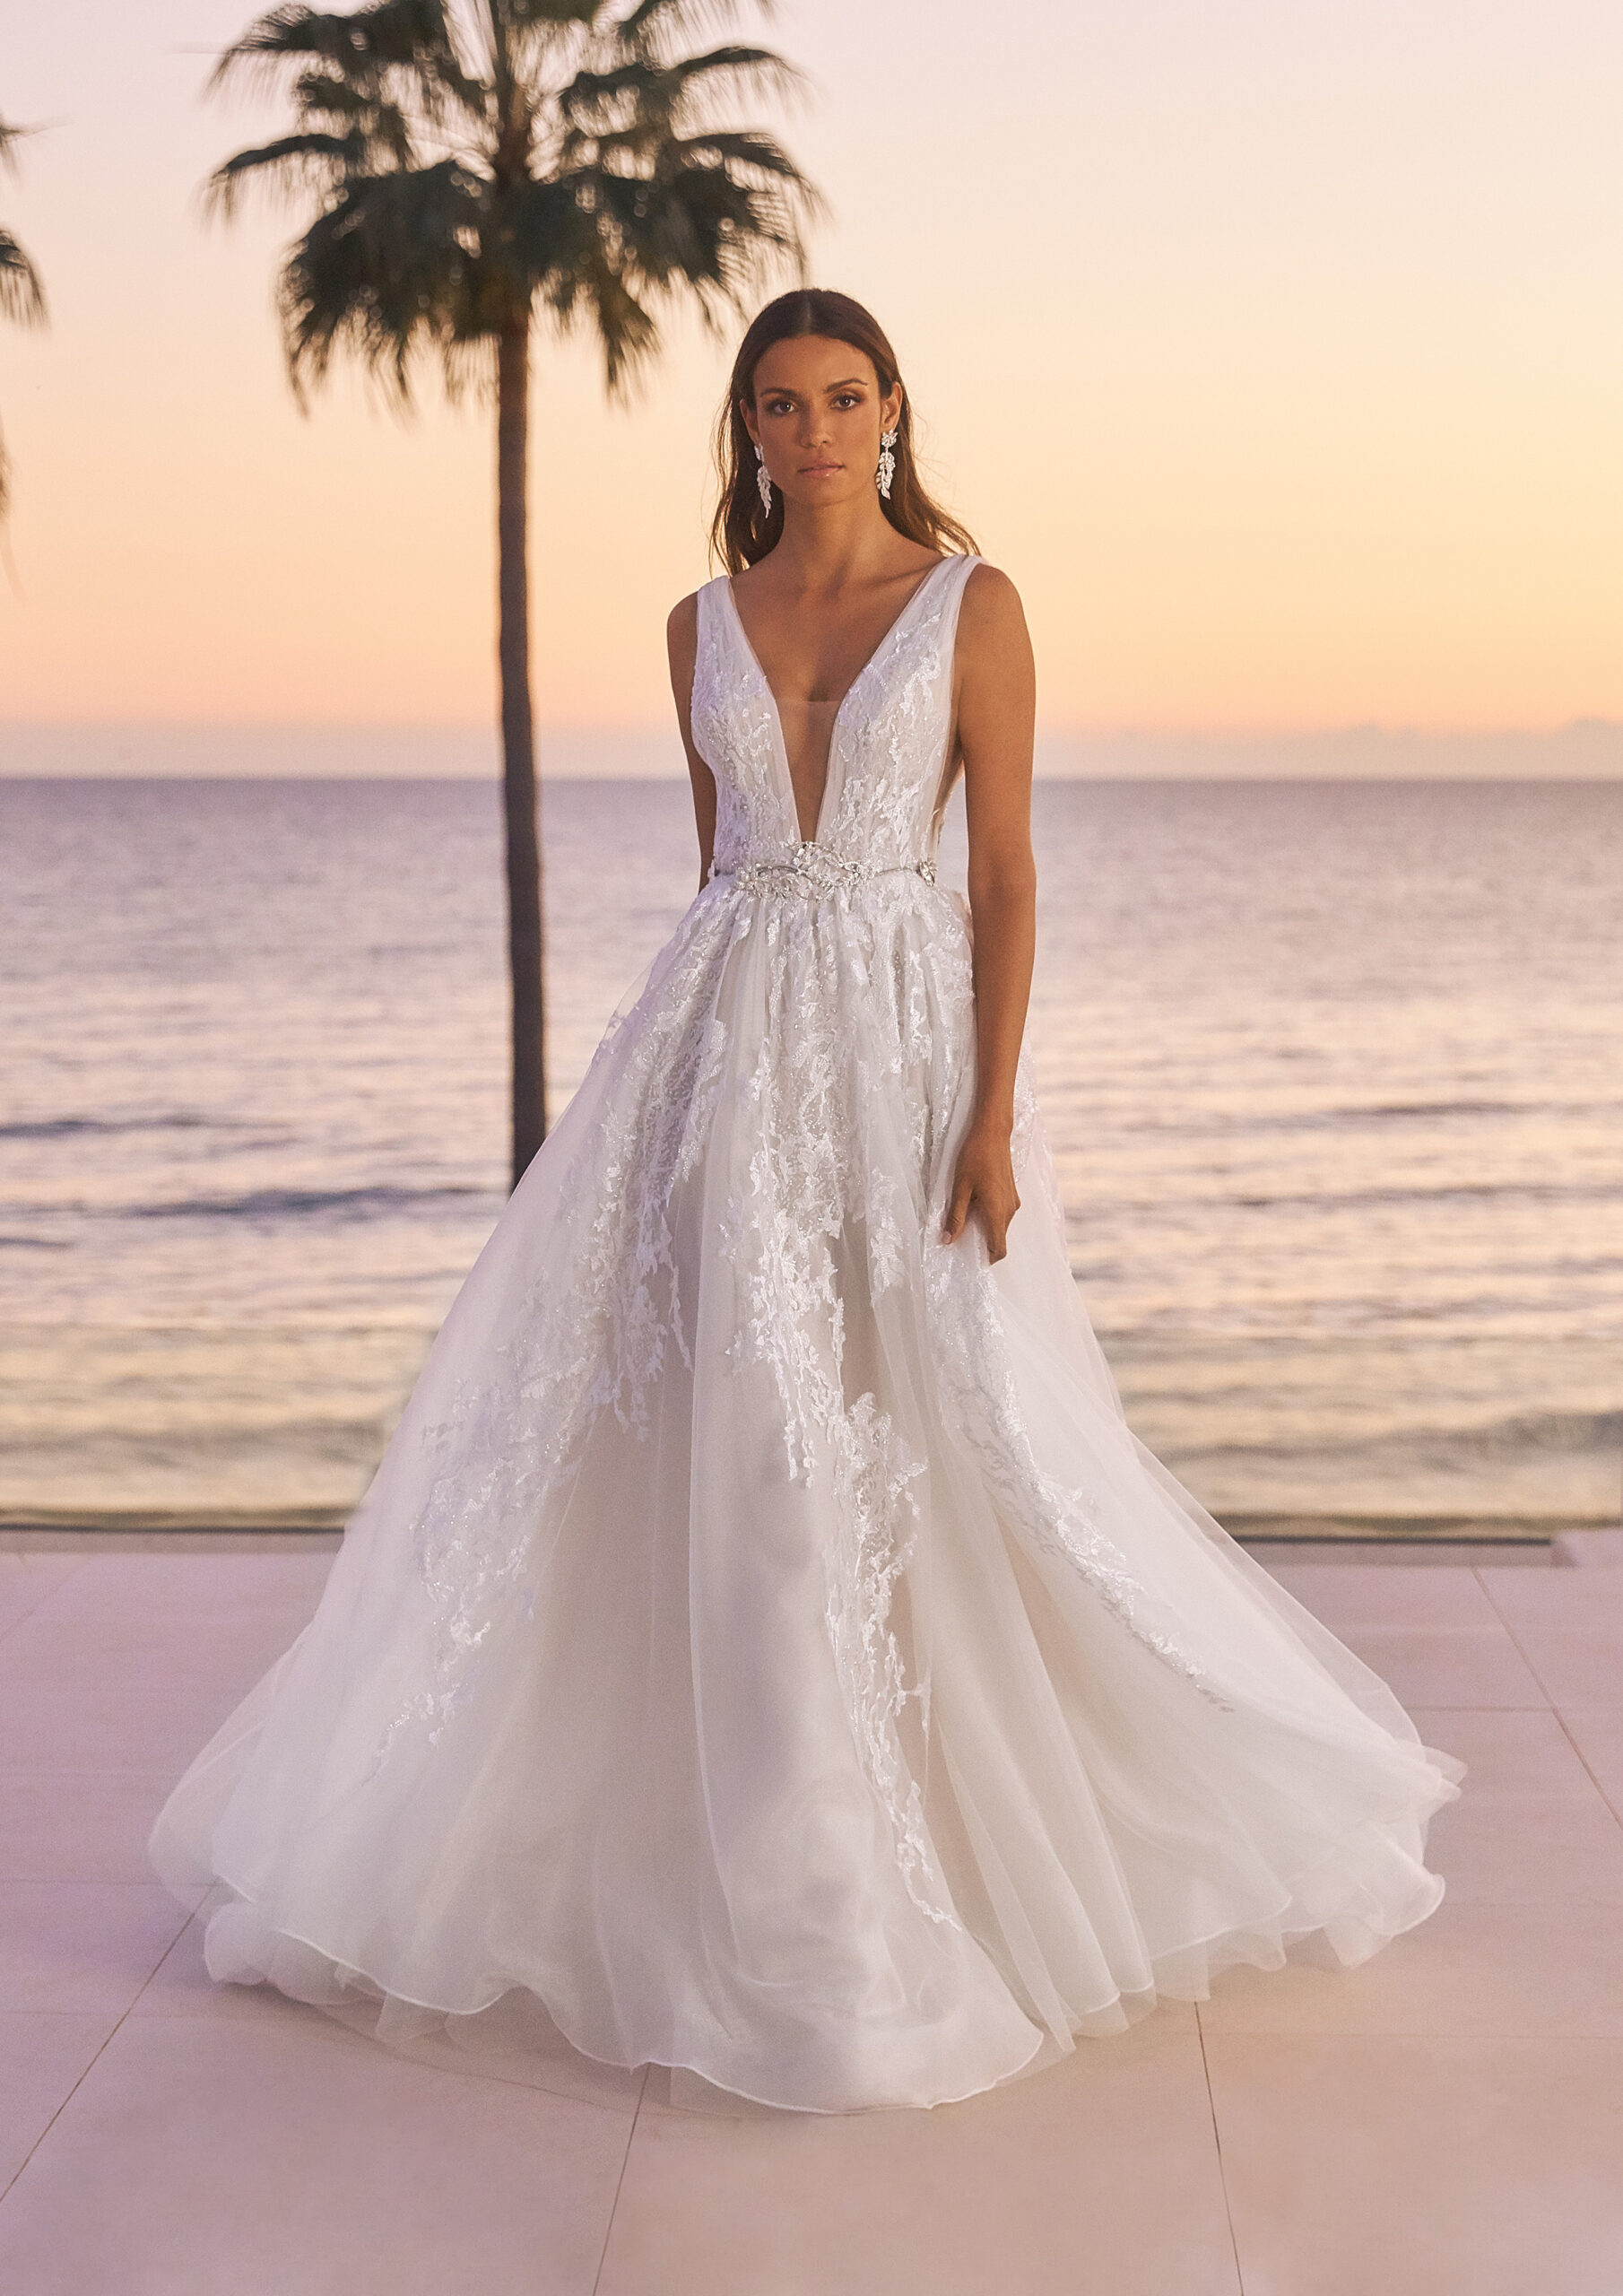 Tinka by Pronovias,  has all the elegance of a lace wedding dress with some fun elements of a boho bride. It's available in Belladonna Bridal, Galway